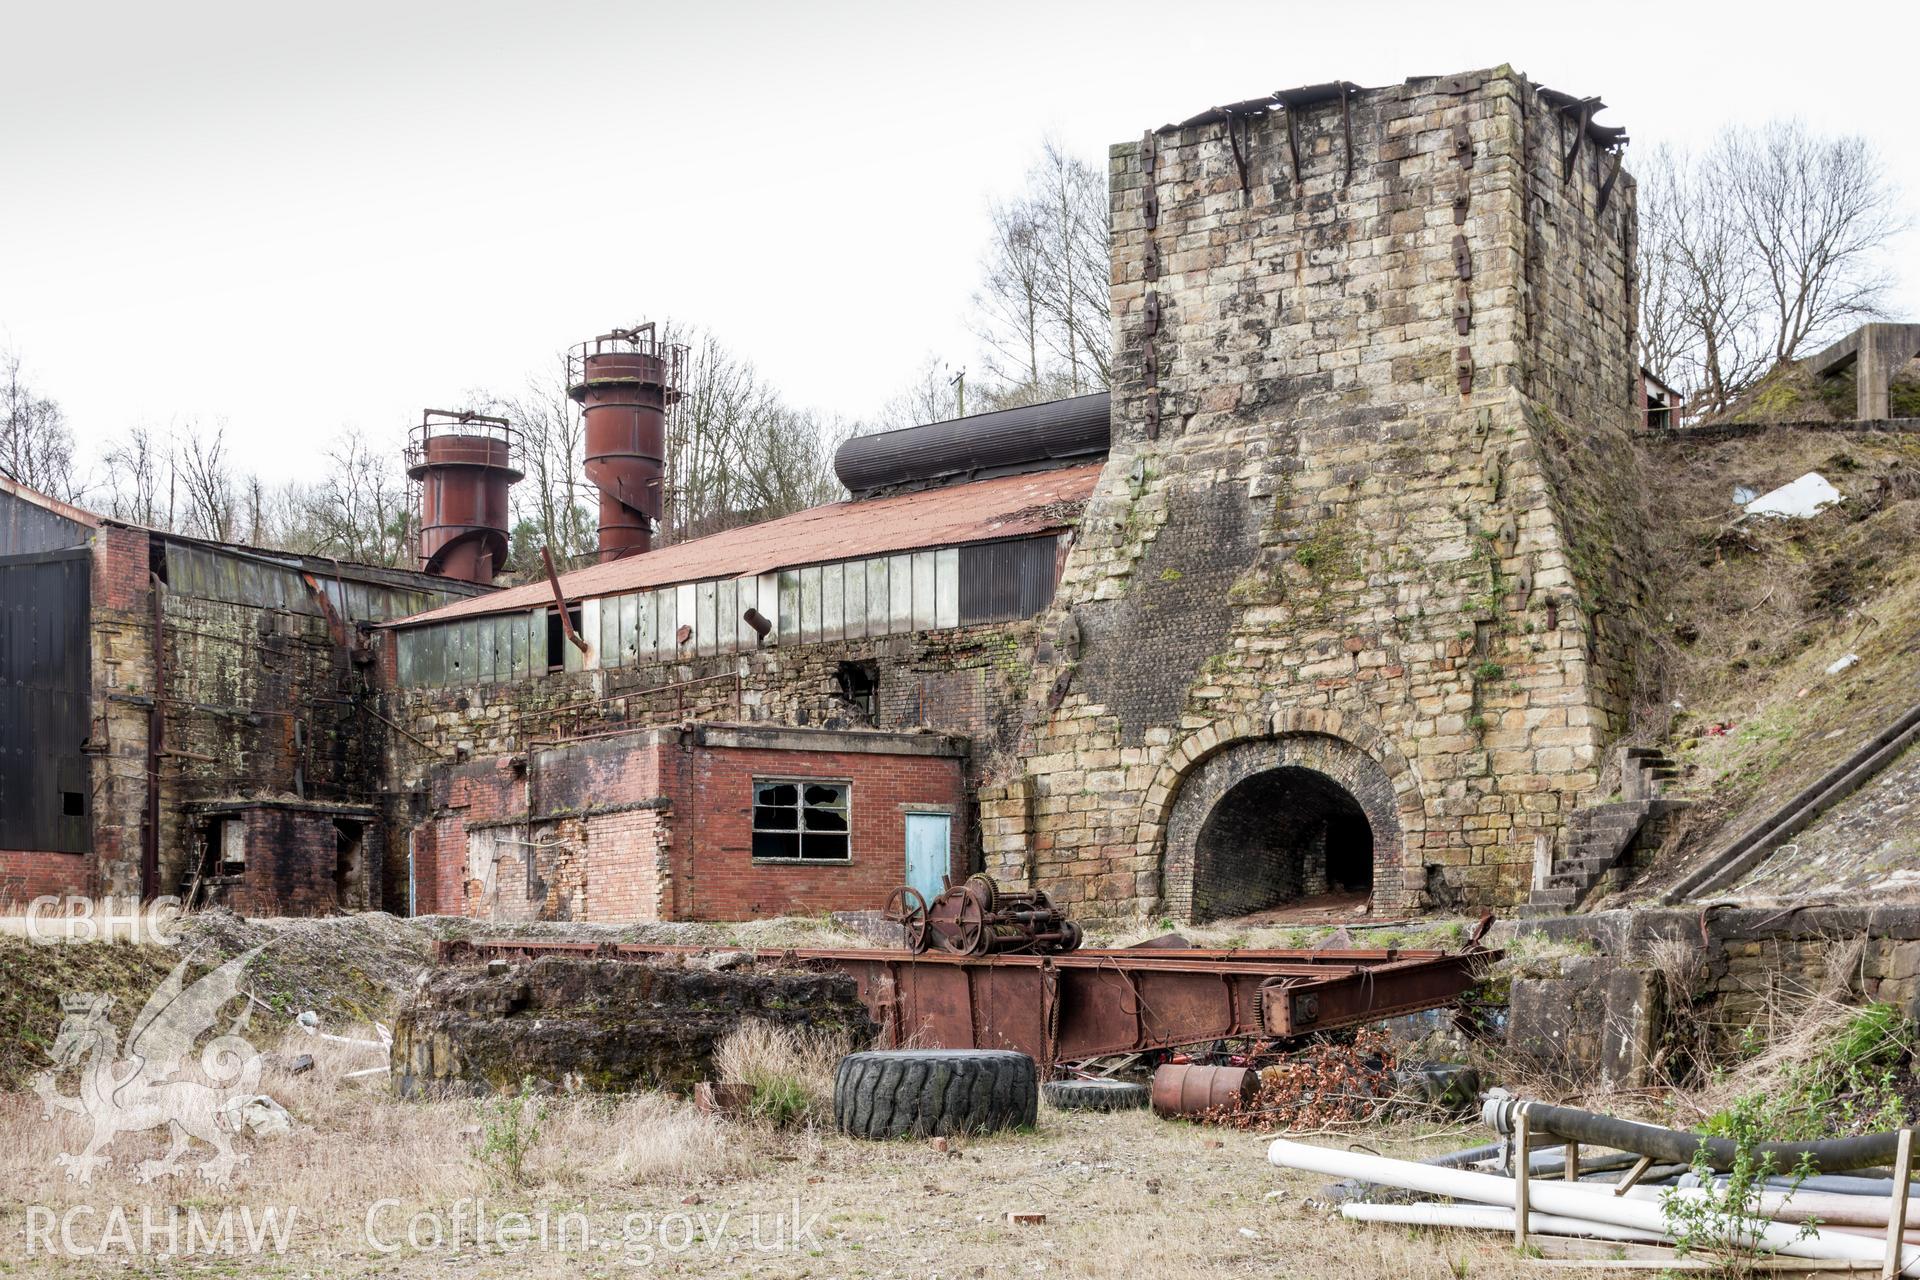 Blast furnace and foundry from the north northeast